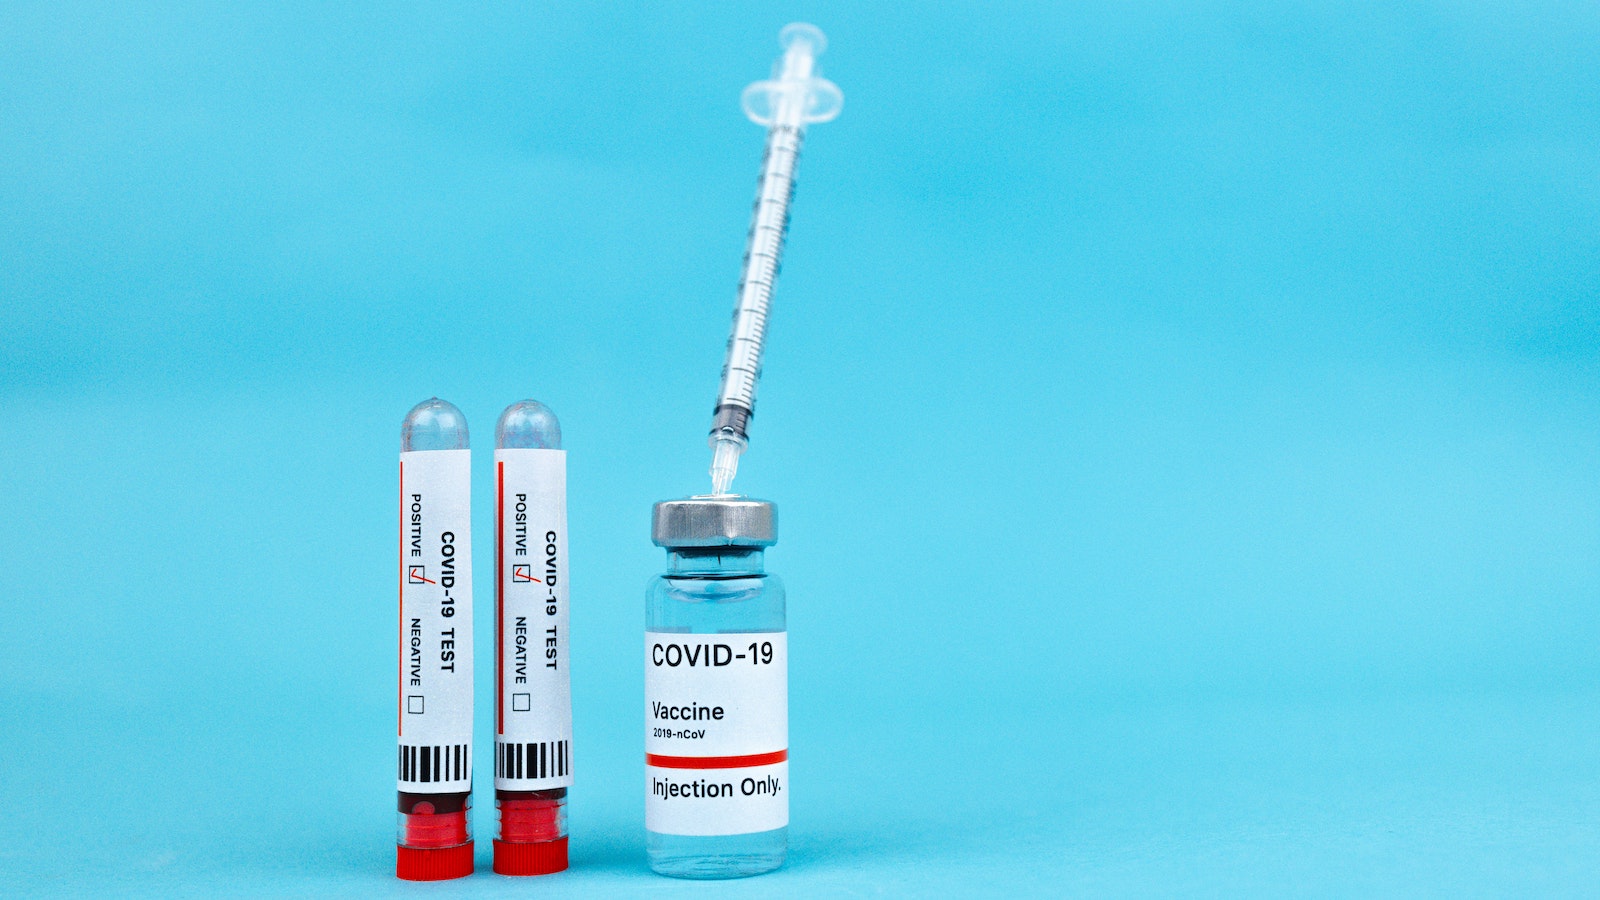 Covid test and vaccine on a blue background